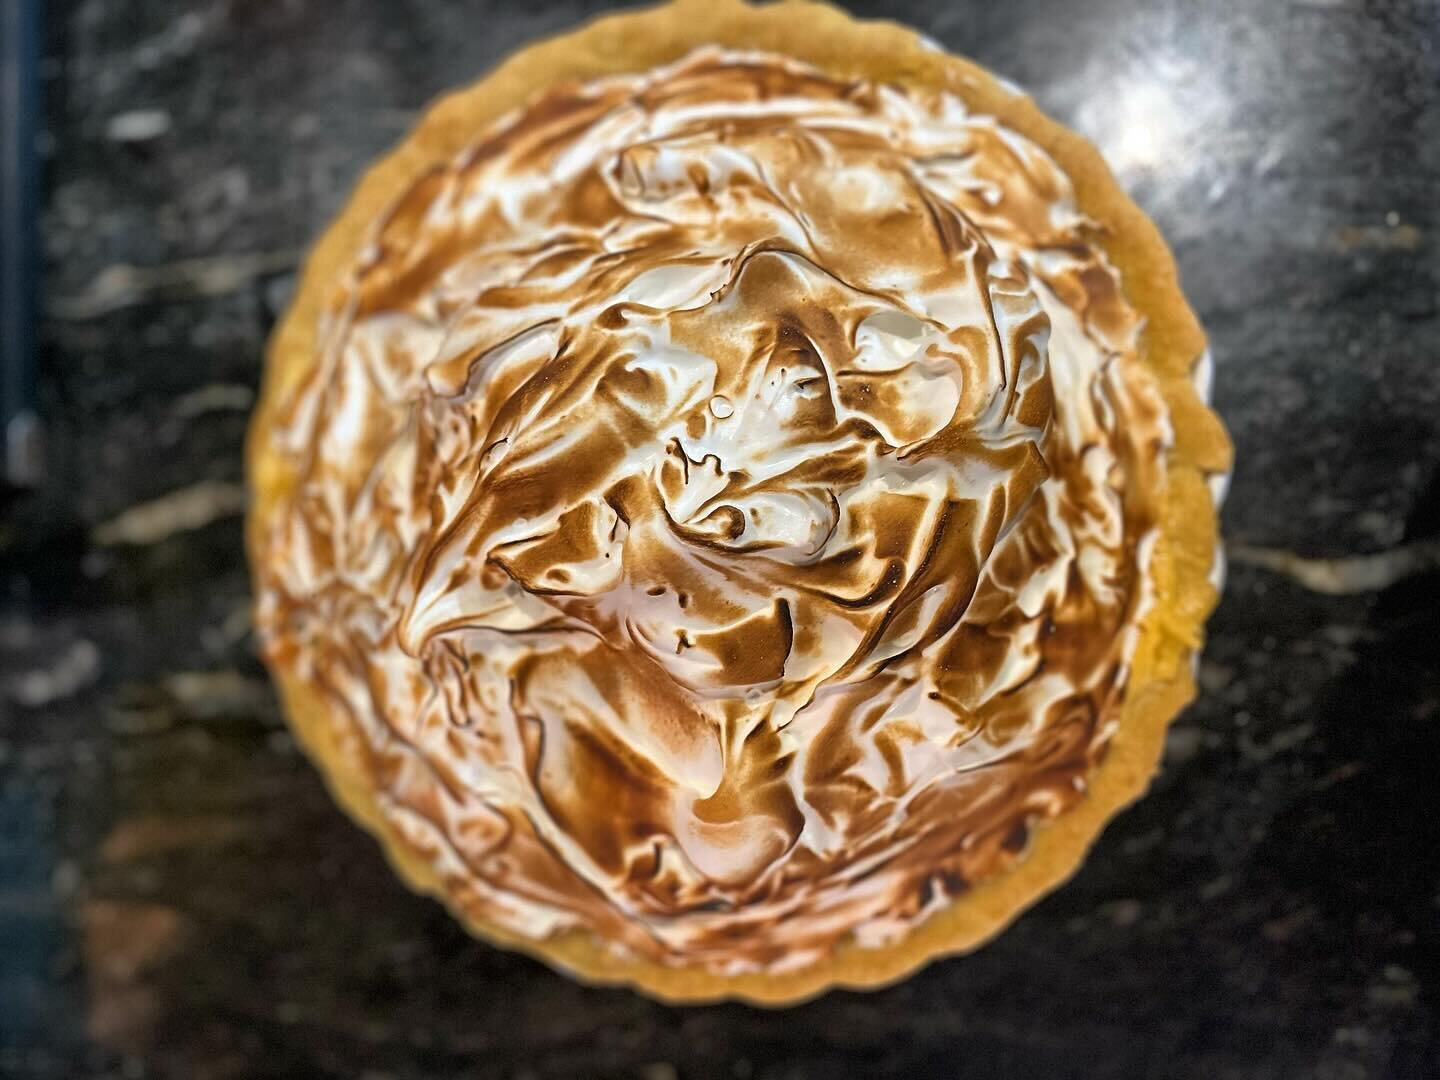 If the main courses weren&rsquo;t enough to tempt you, how about this homemade lemon meringue pie 🍋 we also have vanilla creme br&ucirc;l&eacute;e with dark chocolate &amp; sea salt dipped shortbread on tonight&rsquo;s desserts menu for #valentinesd